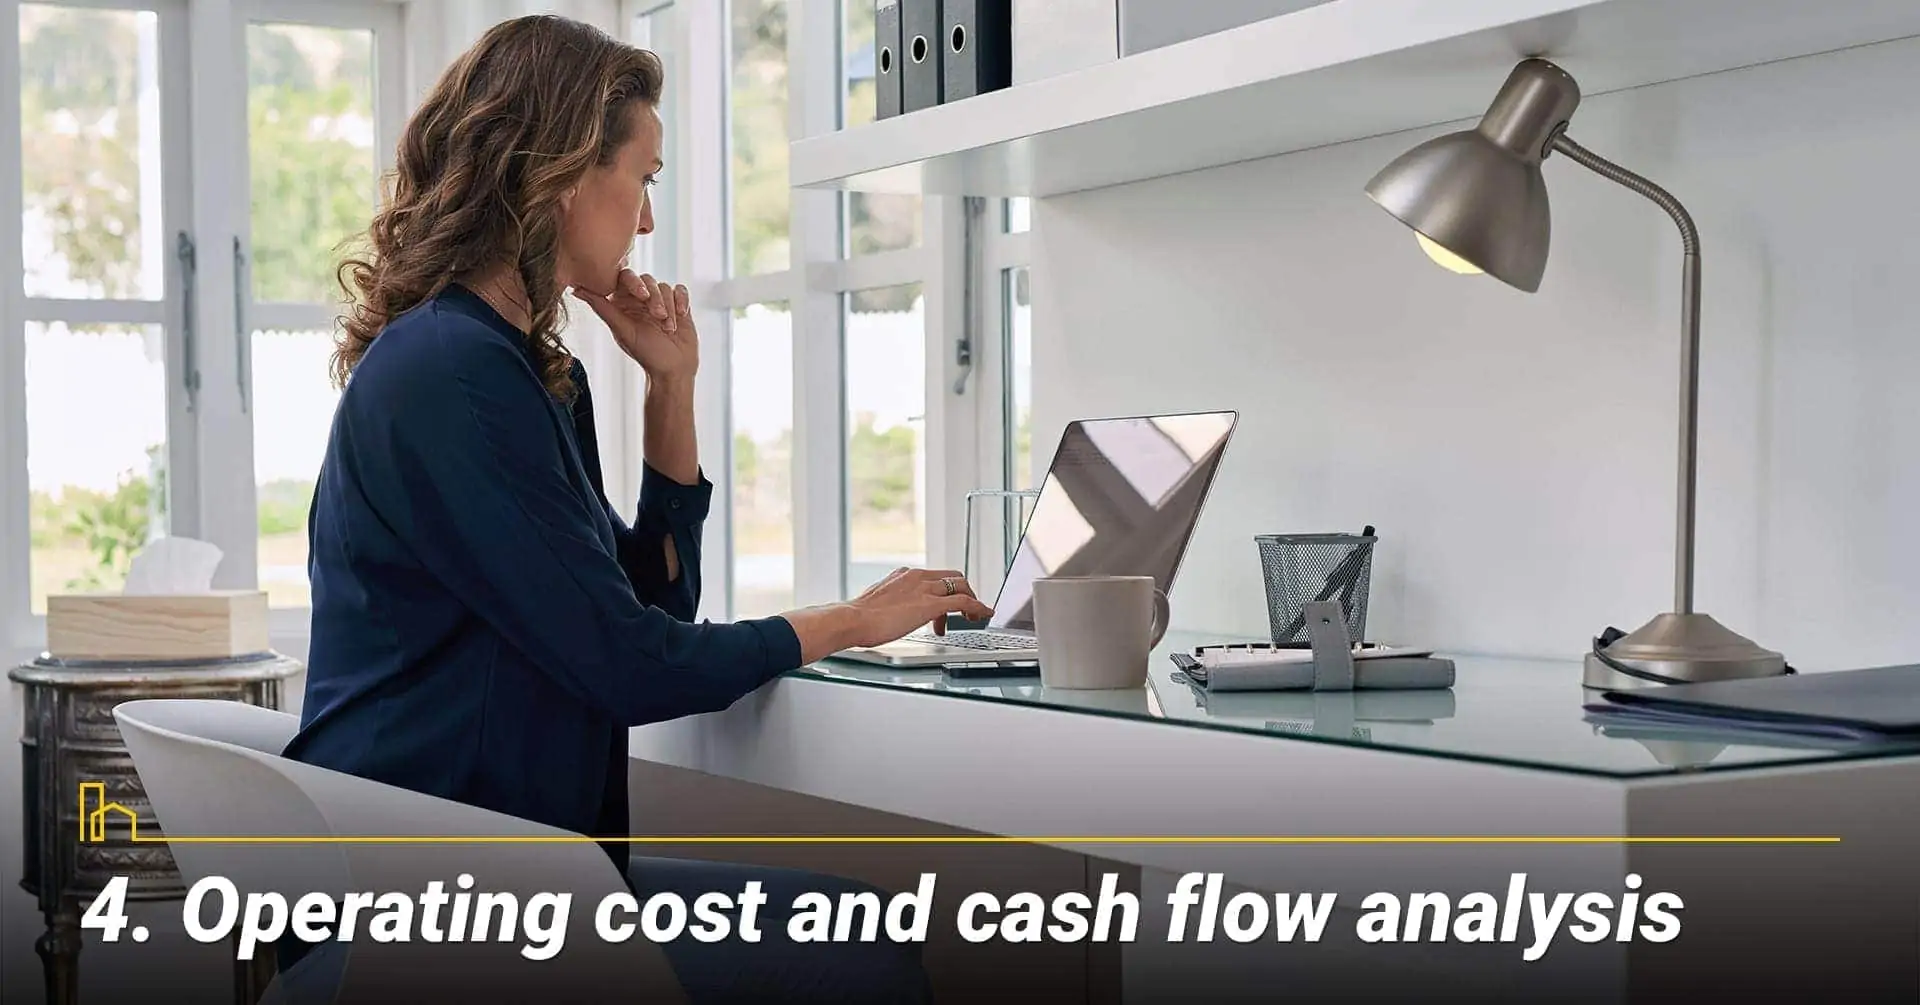 Operating cost and cash flow analysis, conduct your own analysis